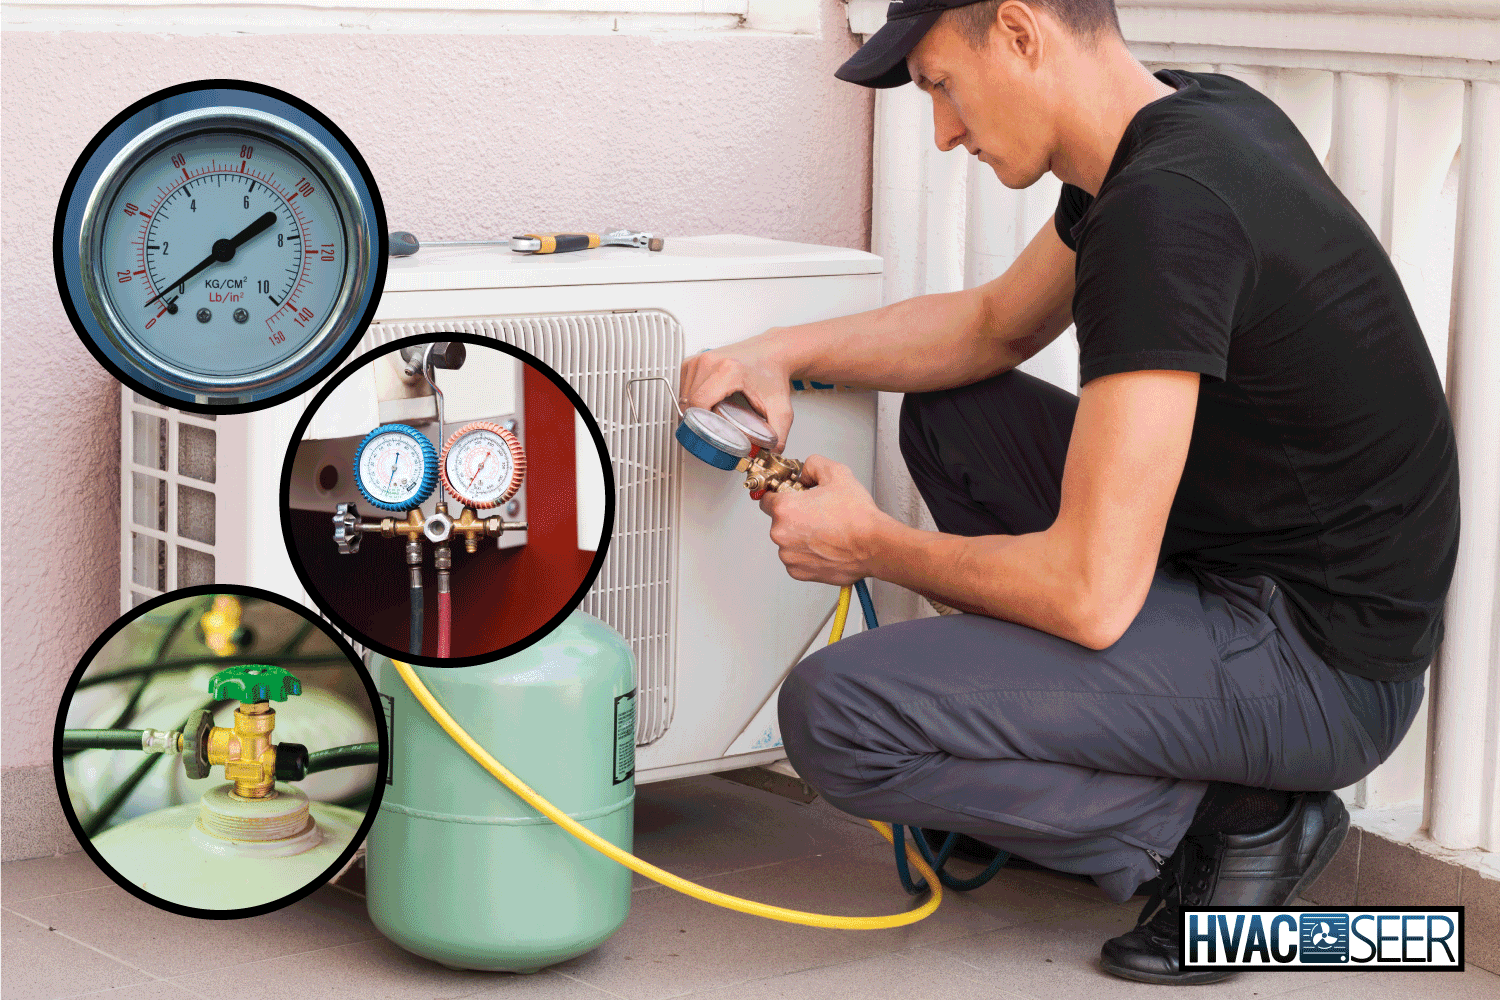 master of repair air conditioners at work. tank of freon beside. tank pressure gauge close up. refrigerant gauges with high and low side close up. cylinder tank valve close up How To Recover Freon Without A Machine